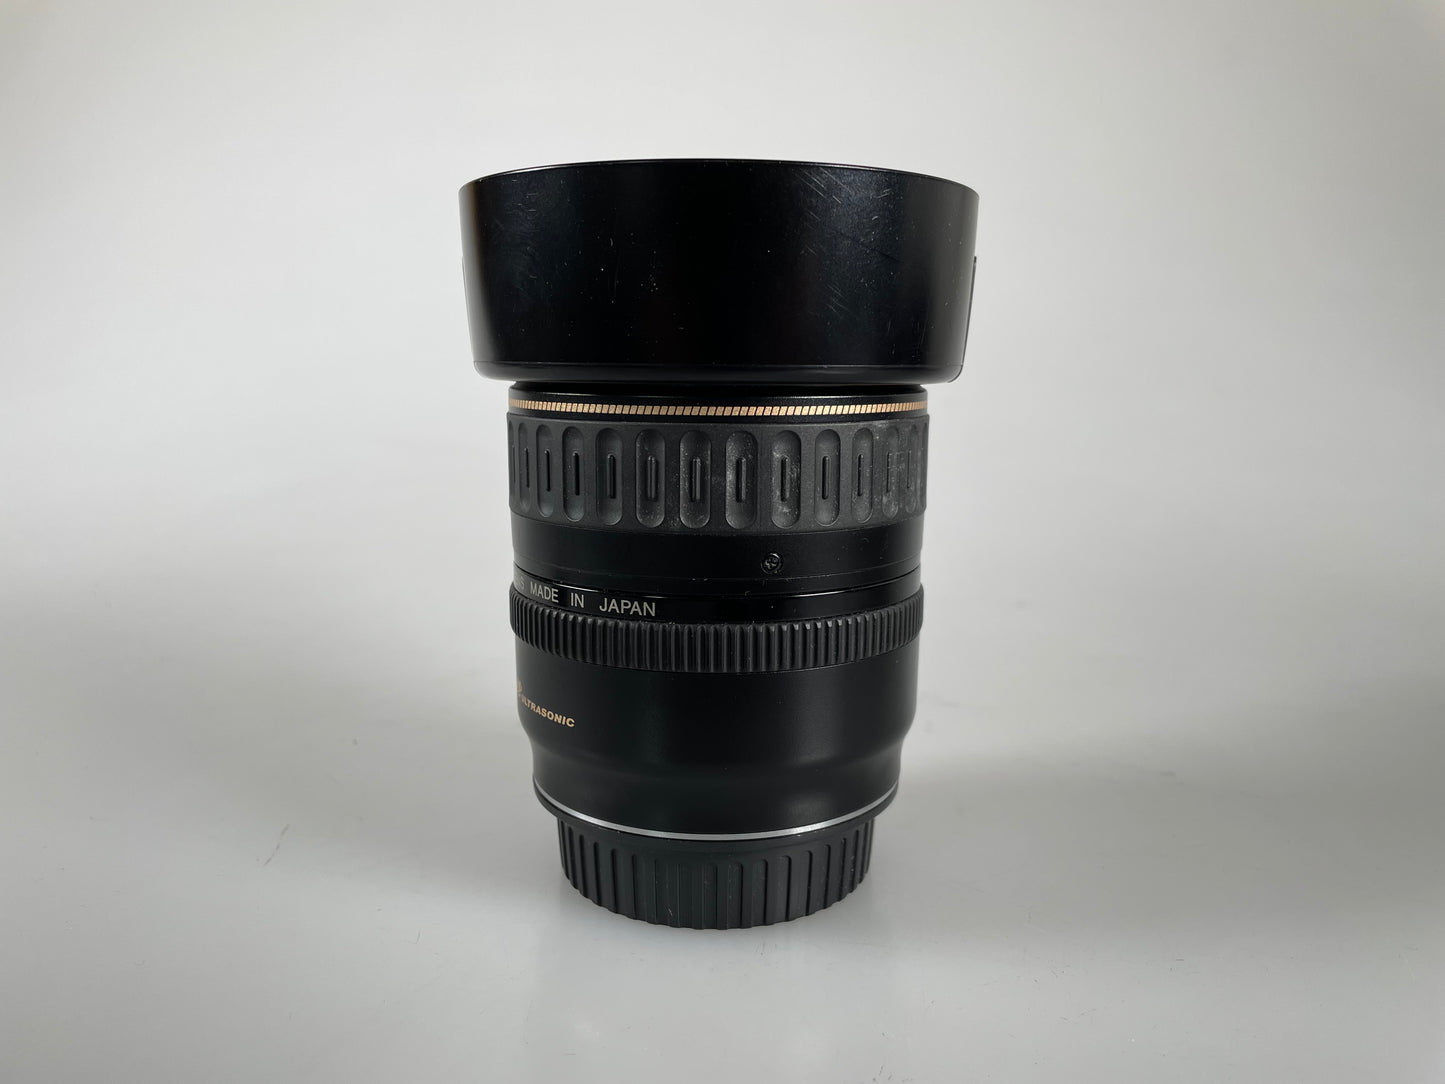 Canon EF 28-80mm f3.5-5.6 Ultrasonic Zoom Lens for Eos